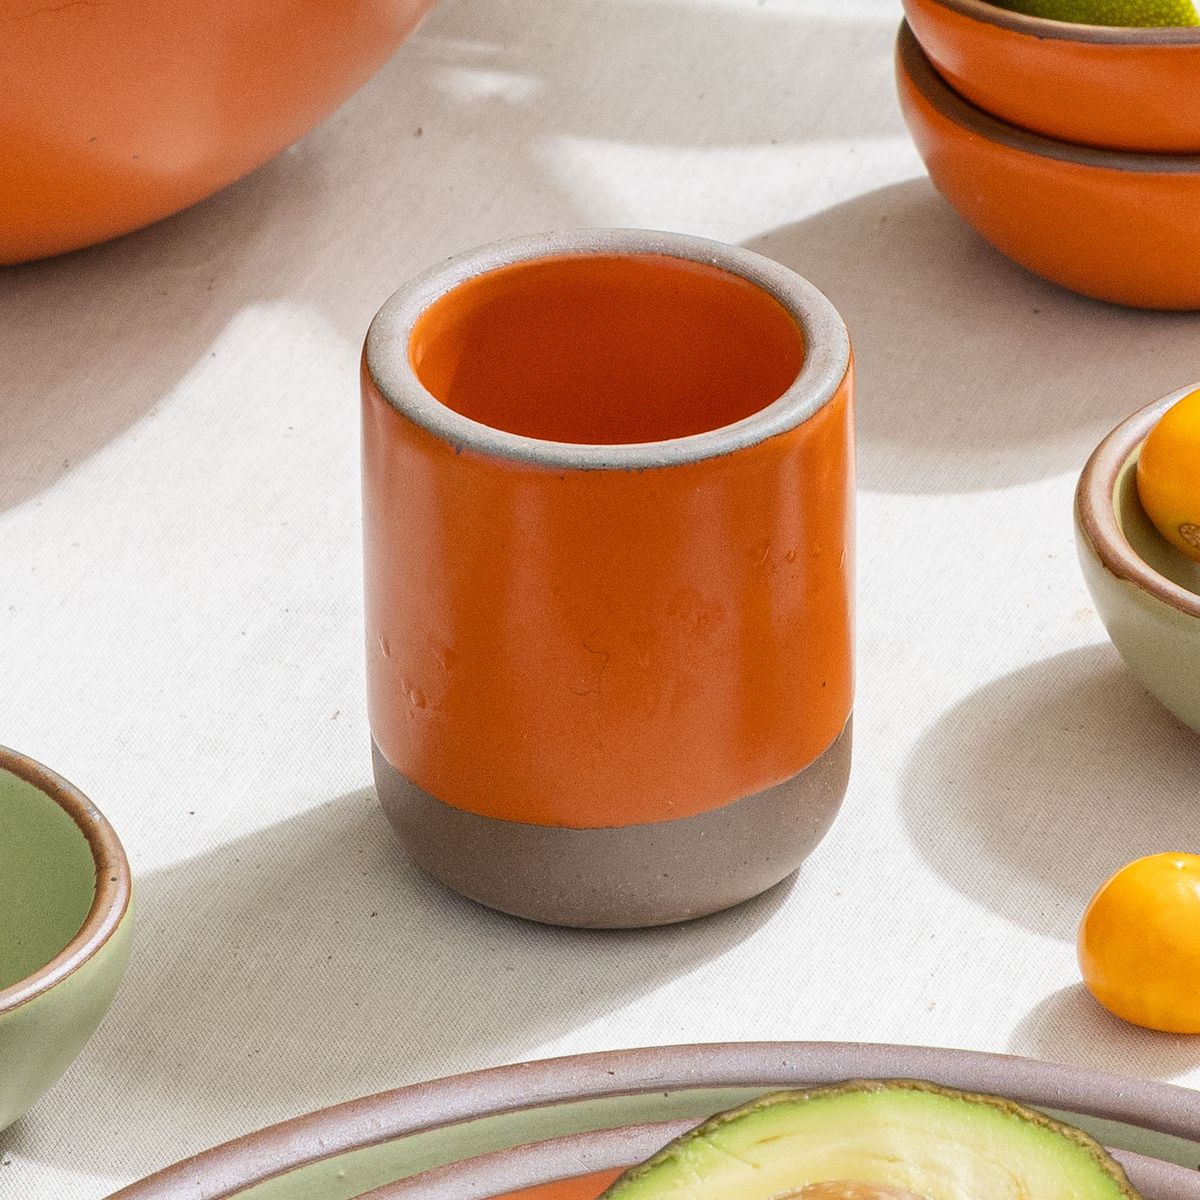 A small, short ceramic mug cup in a bold orange color featuring iron speckles and unglazed rim and bottom base, surrounded by other ceramic pottery in orange and sage green